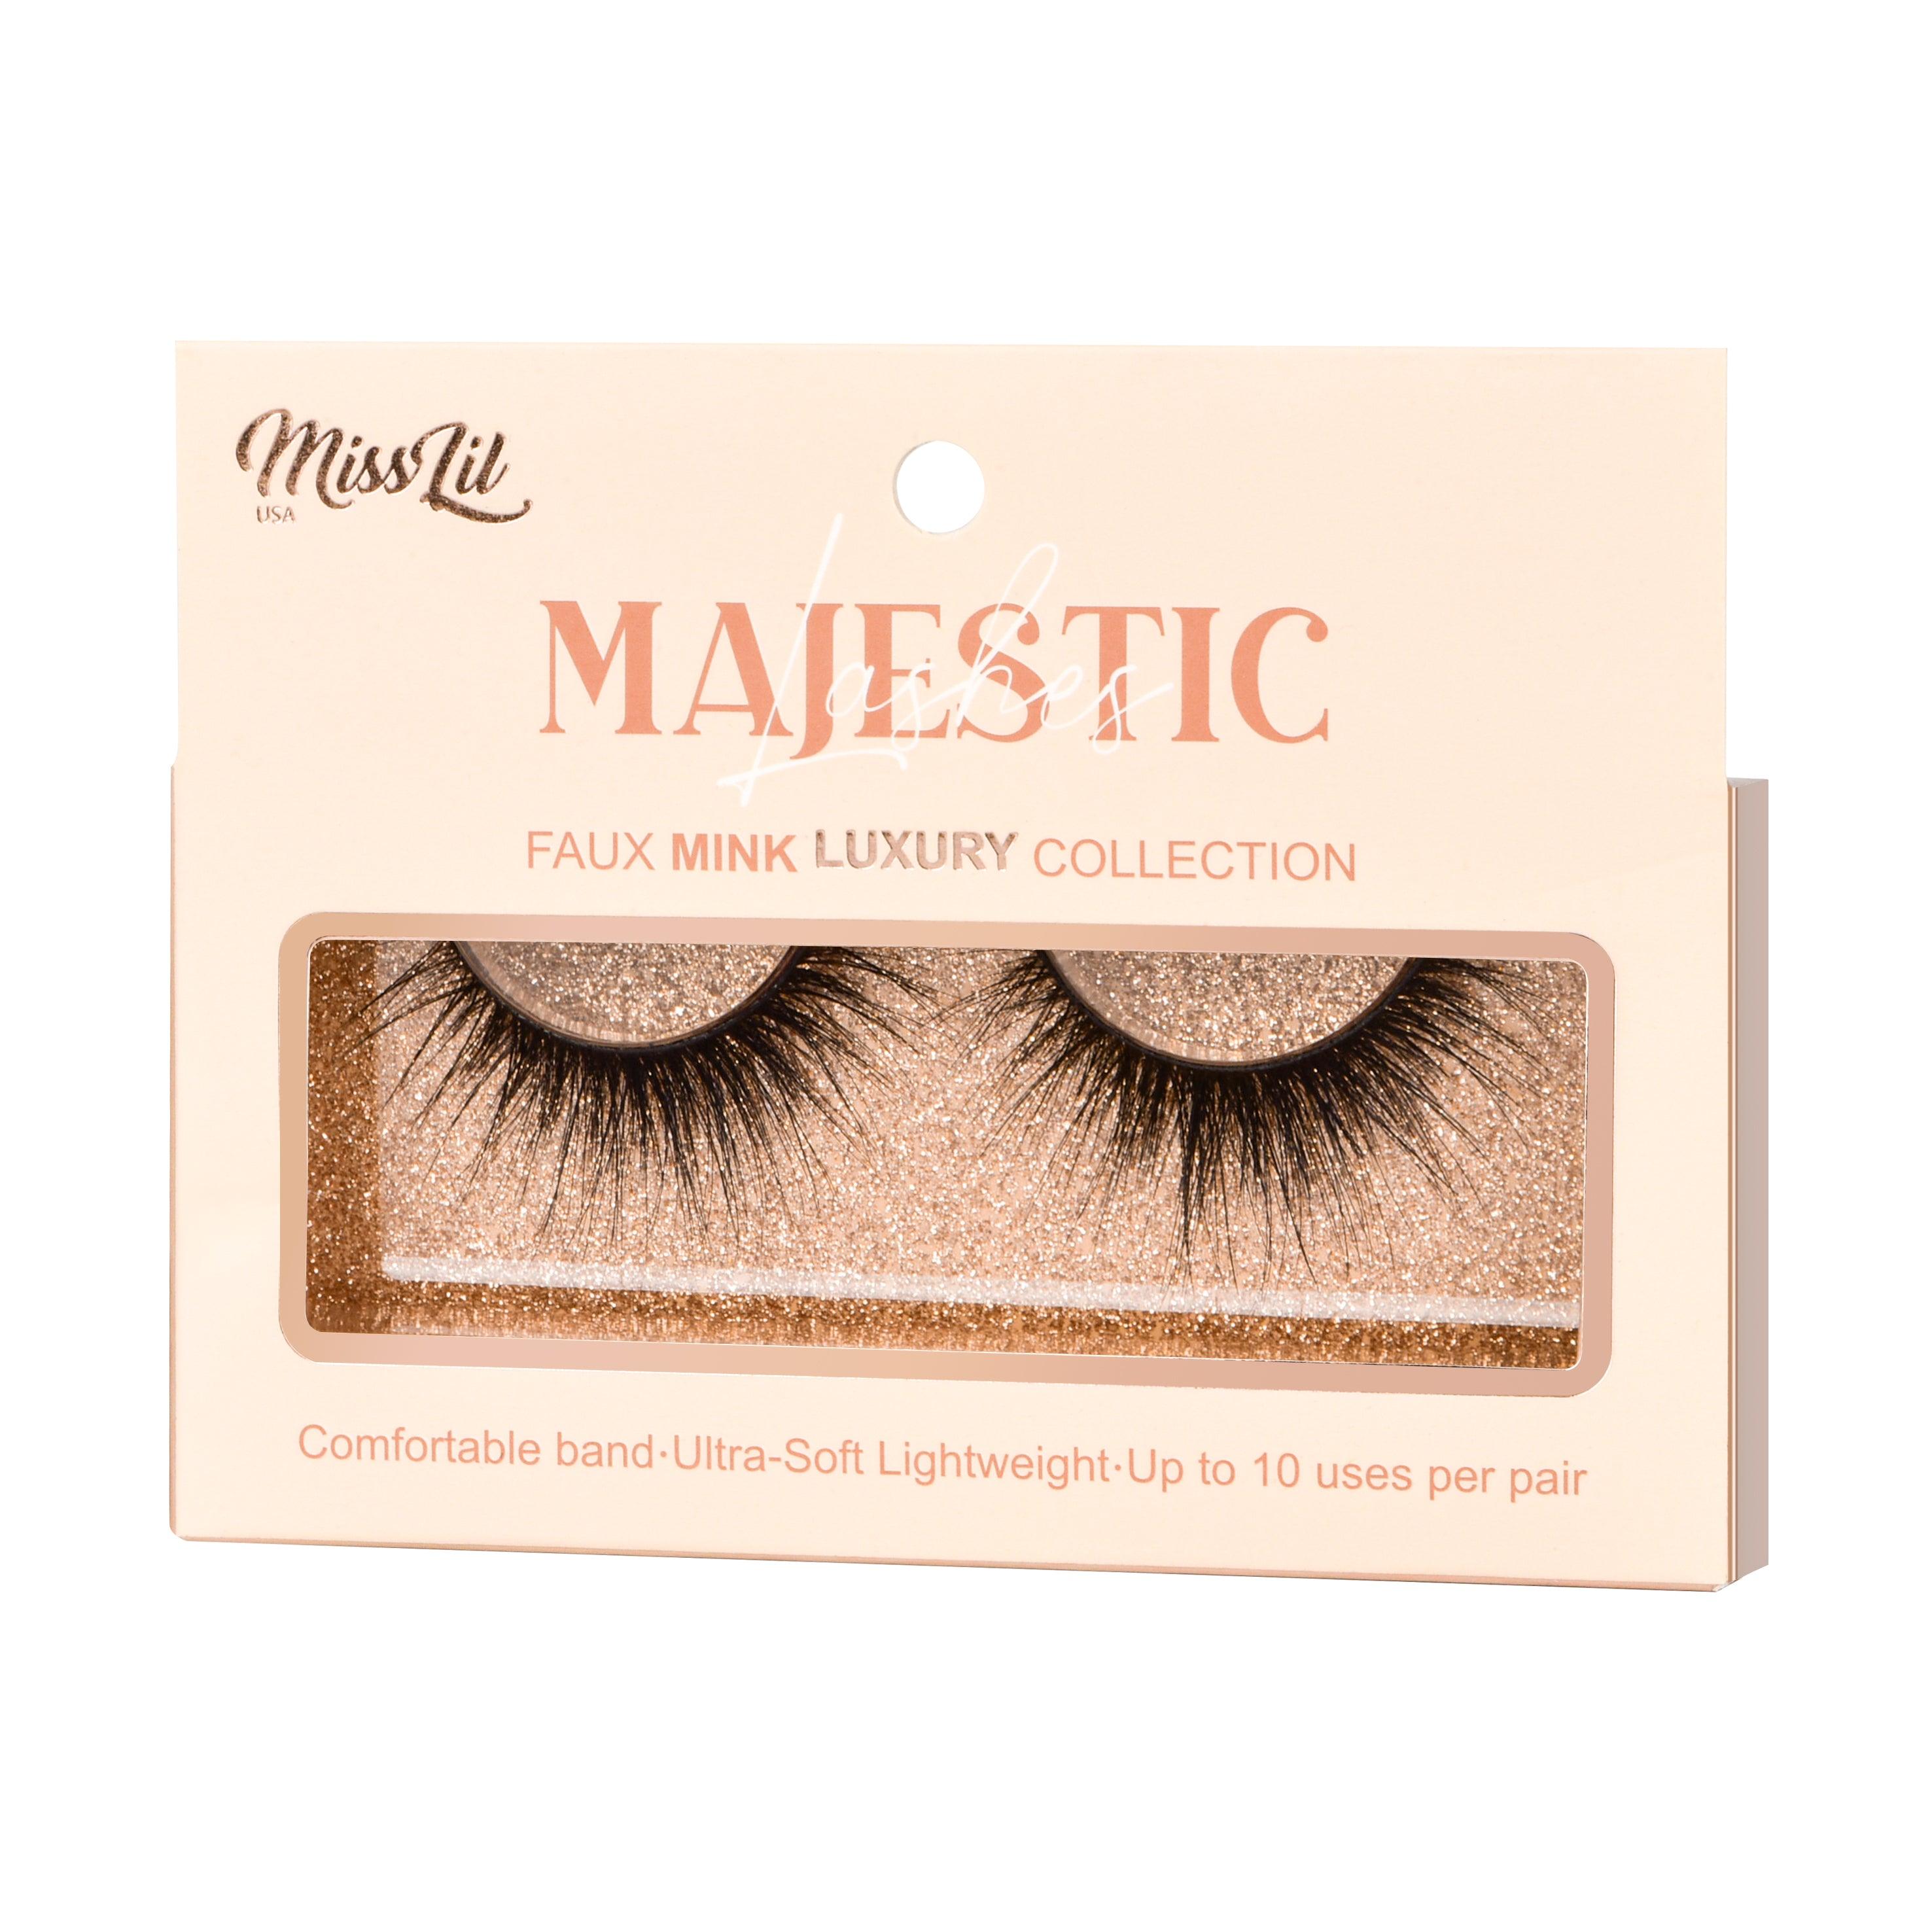 Majestic Collection 27 fake lashes - Miss Lil USA Wholesale